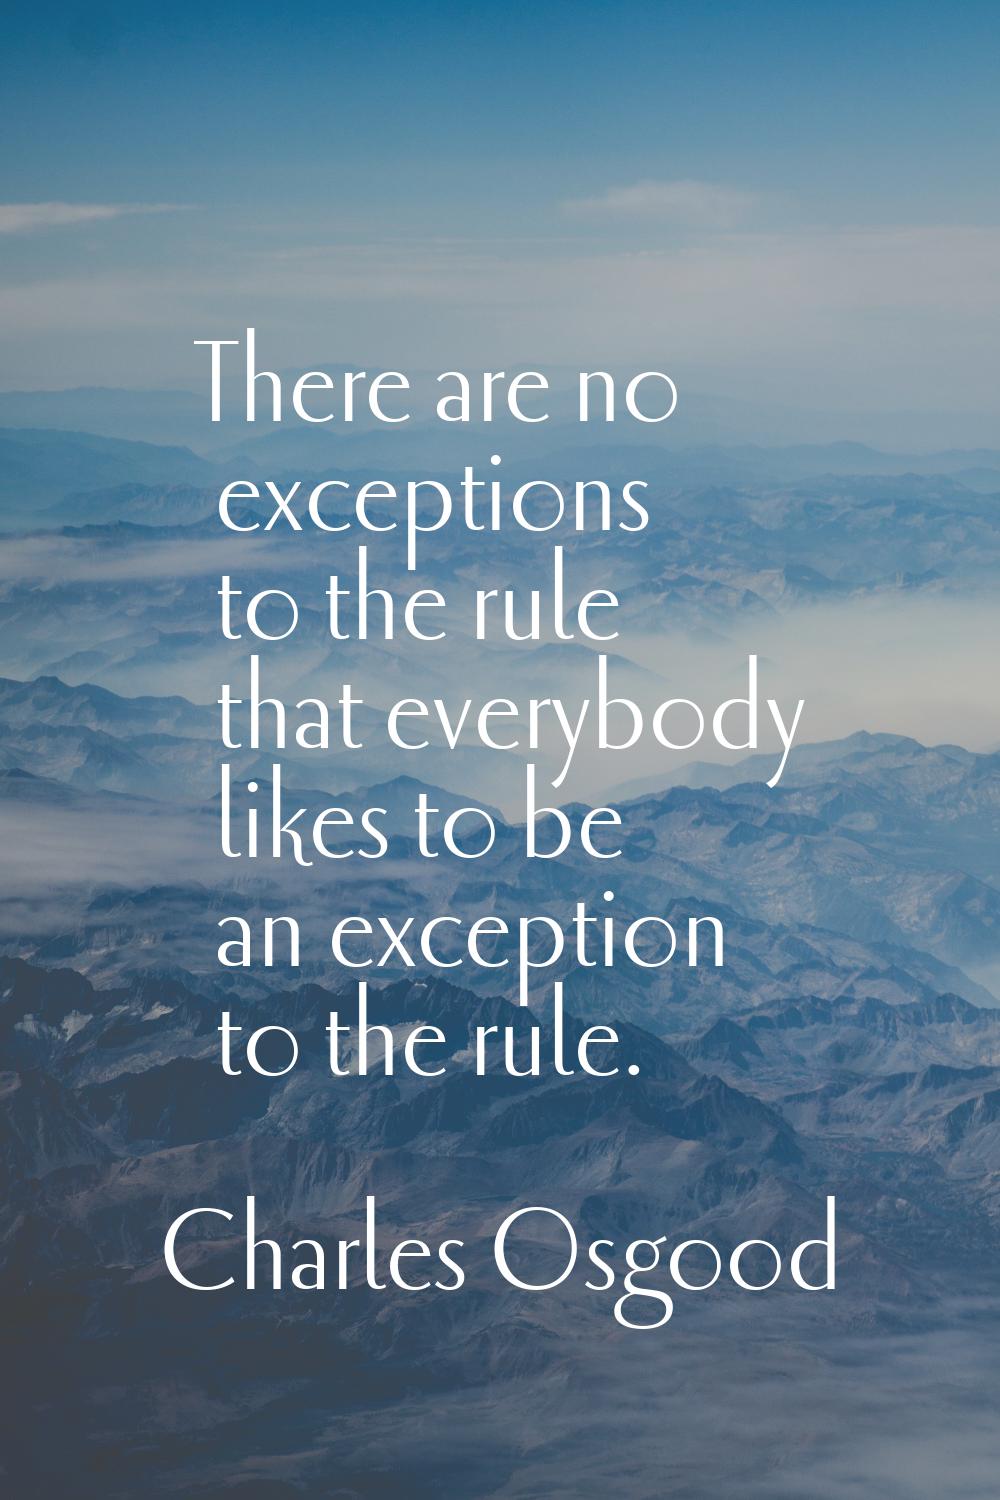 There are no exceptions to the rule that everybody likes to be an exception to the rule.